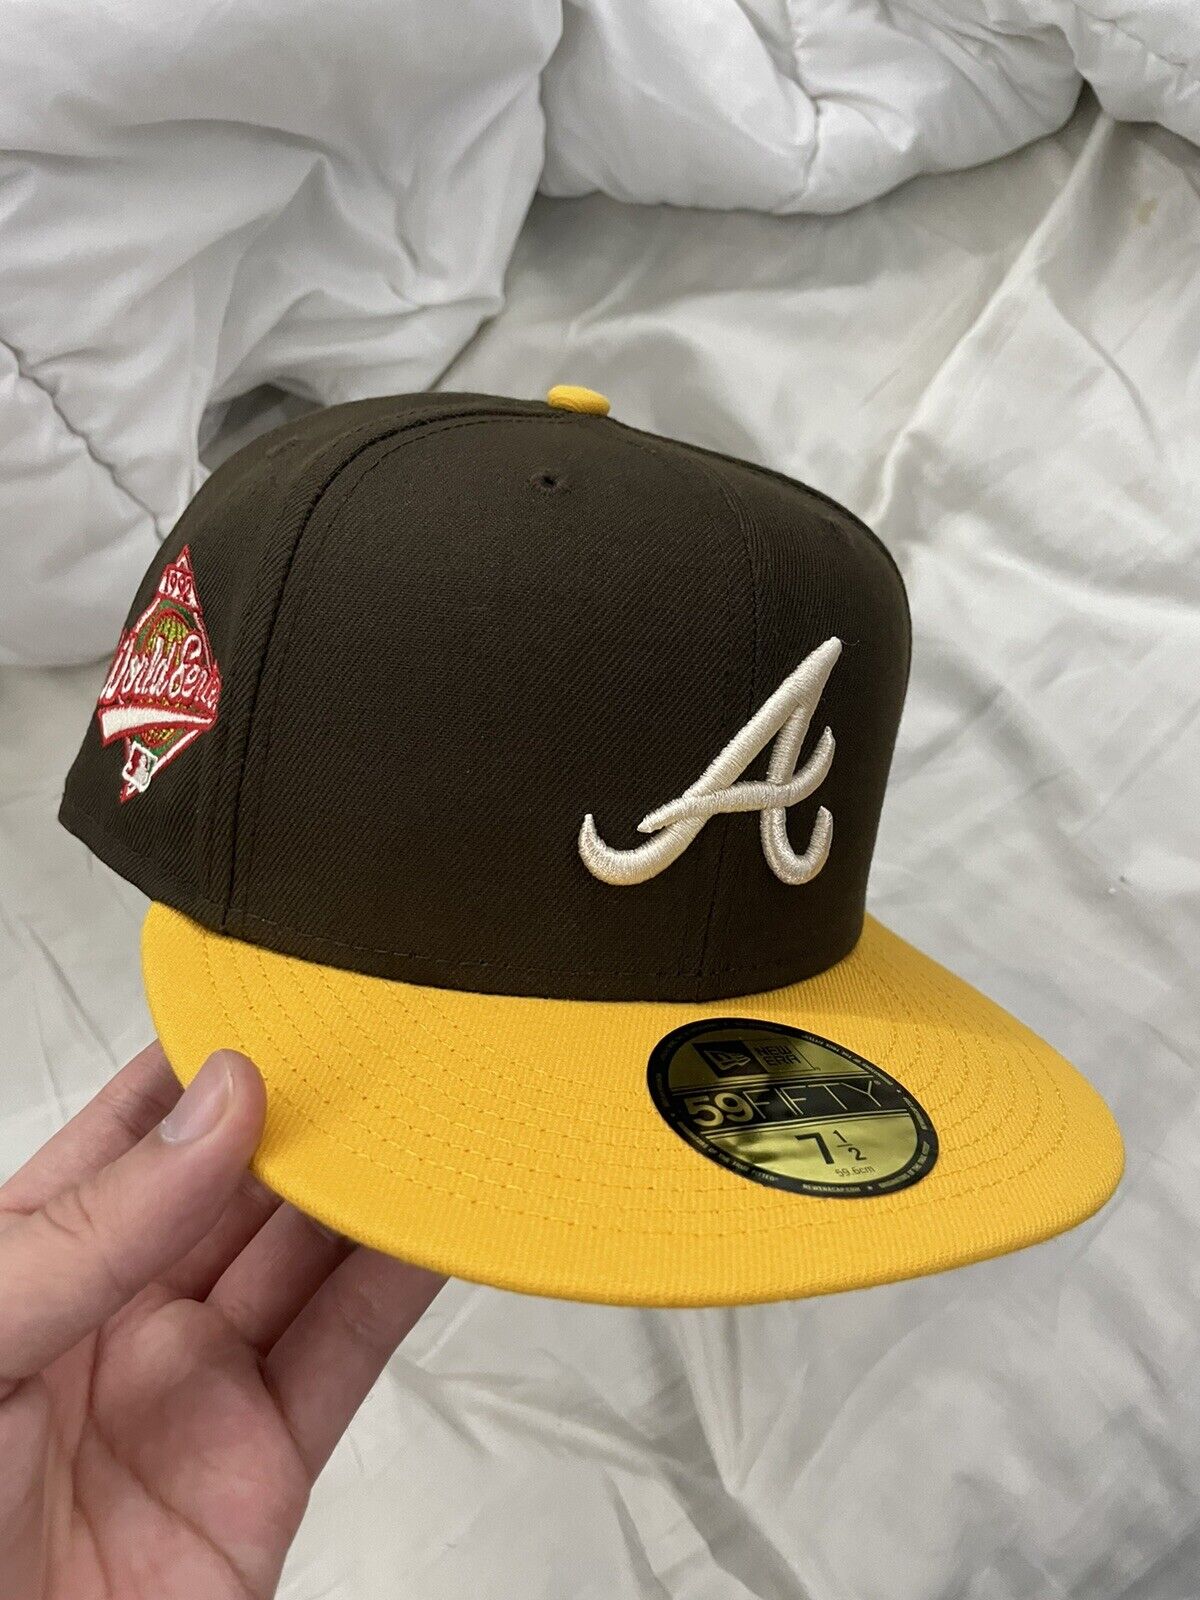 Milwaukee Braves Manolo Peach Bottom Hat Club 7 1/8 for Sale in